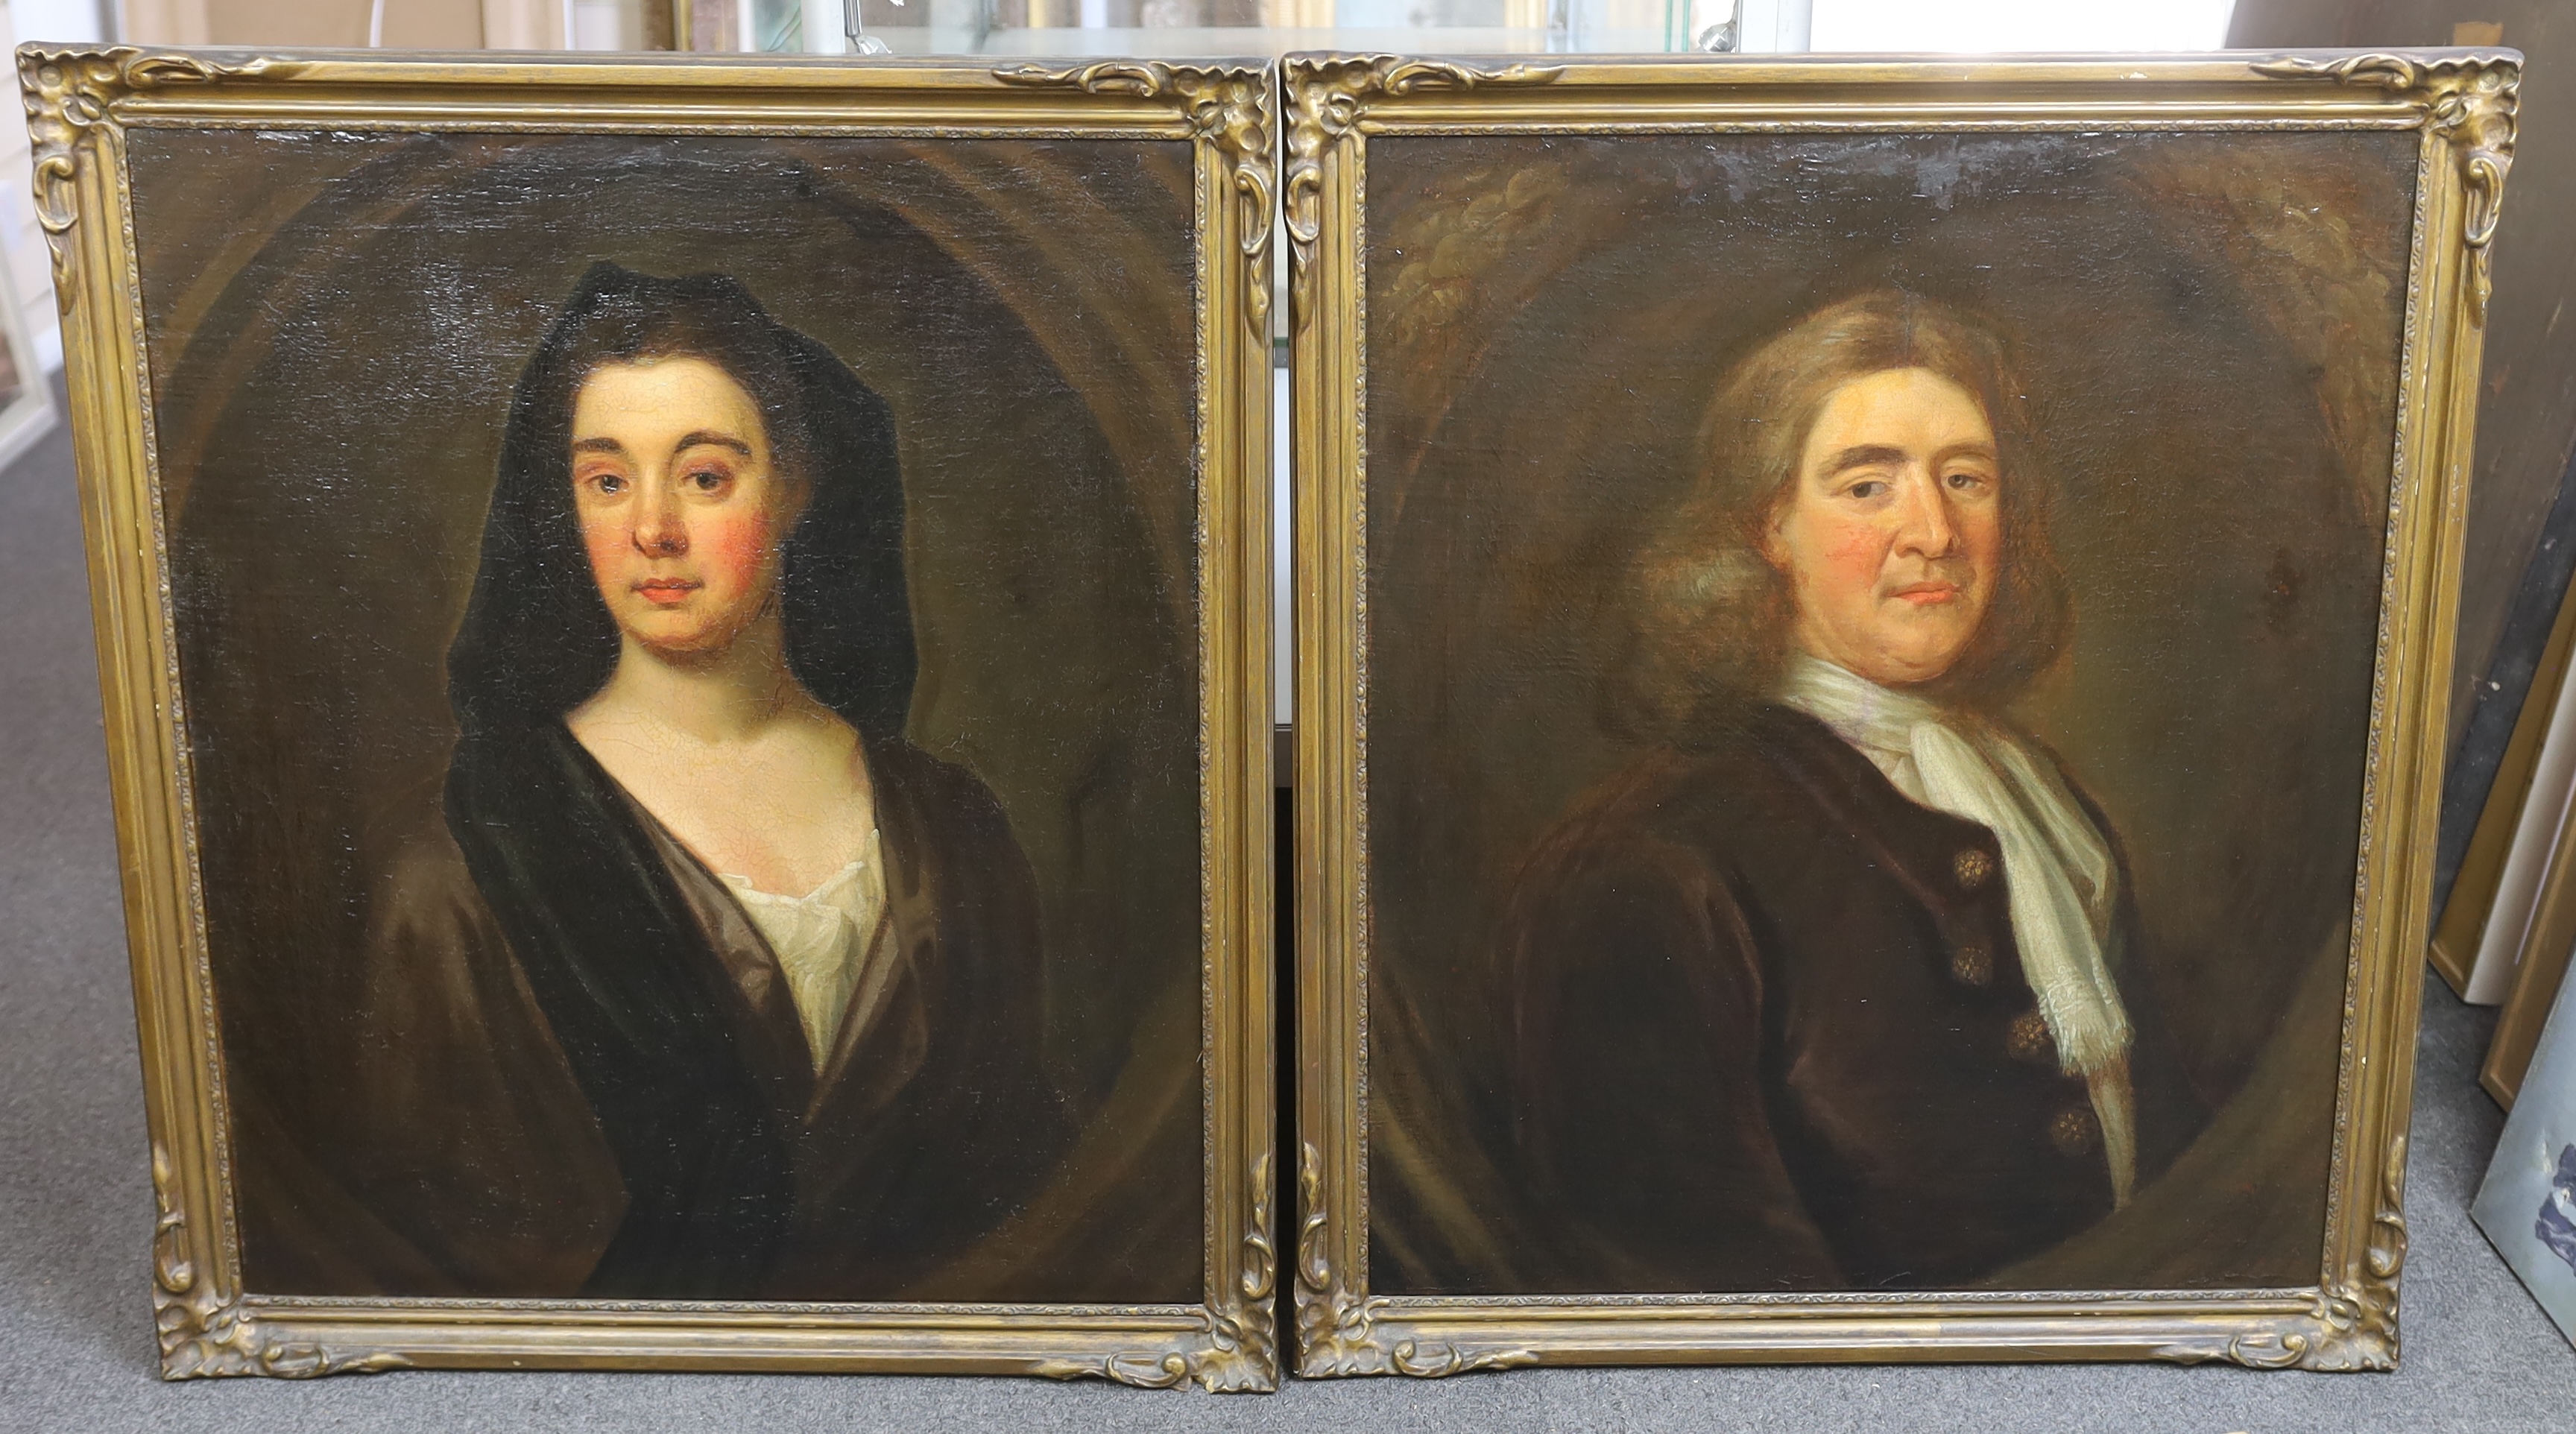 Early 18th century Continental School, Portraits of a lady and gentleman, oil on canvas, a pair, 77 x 64cm